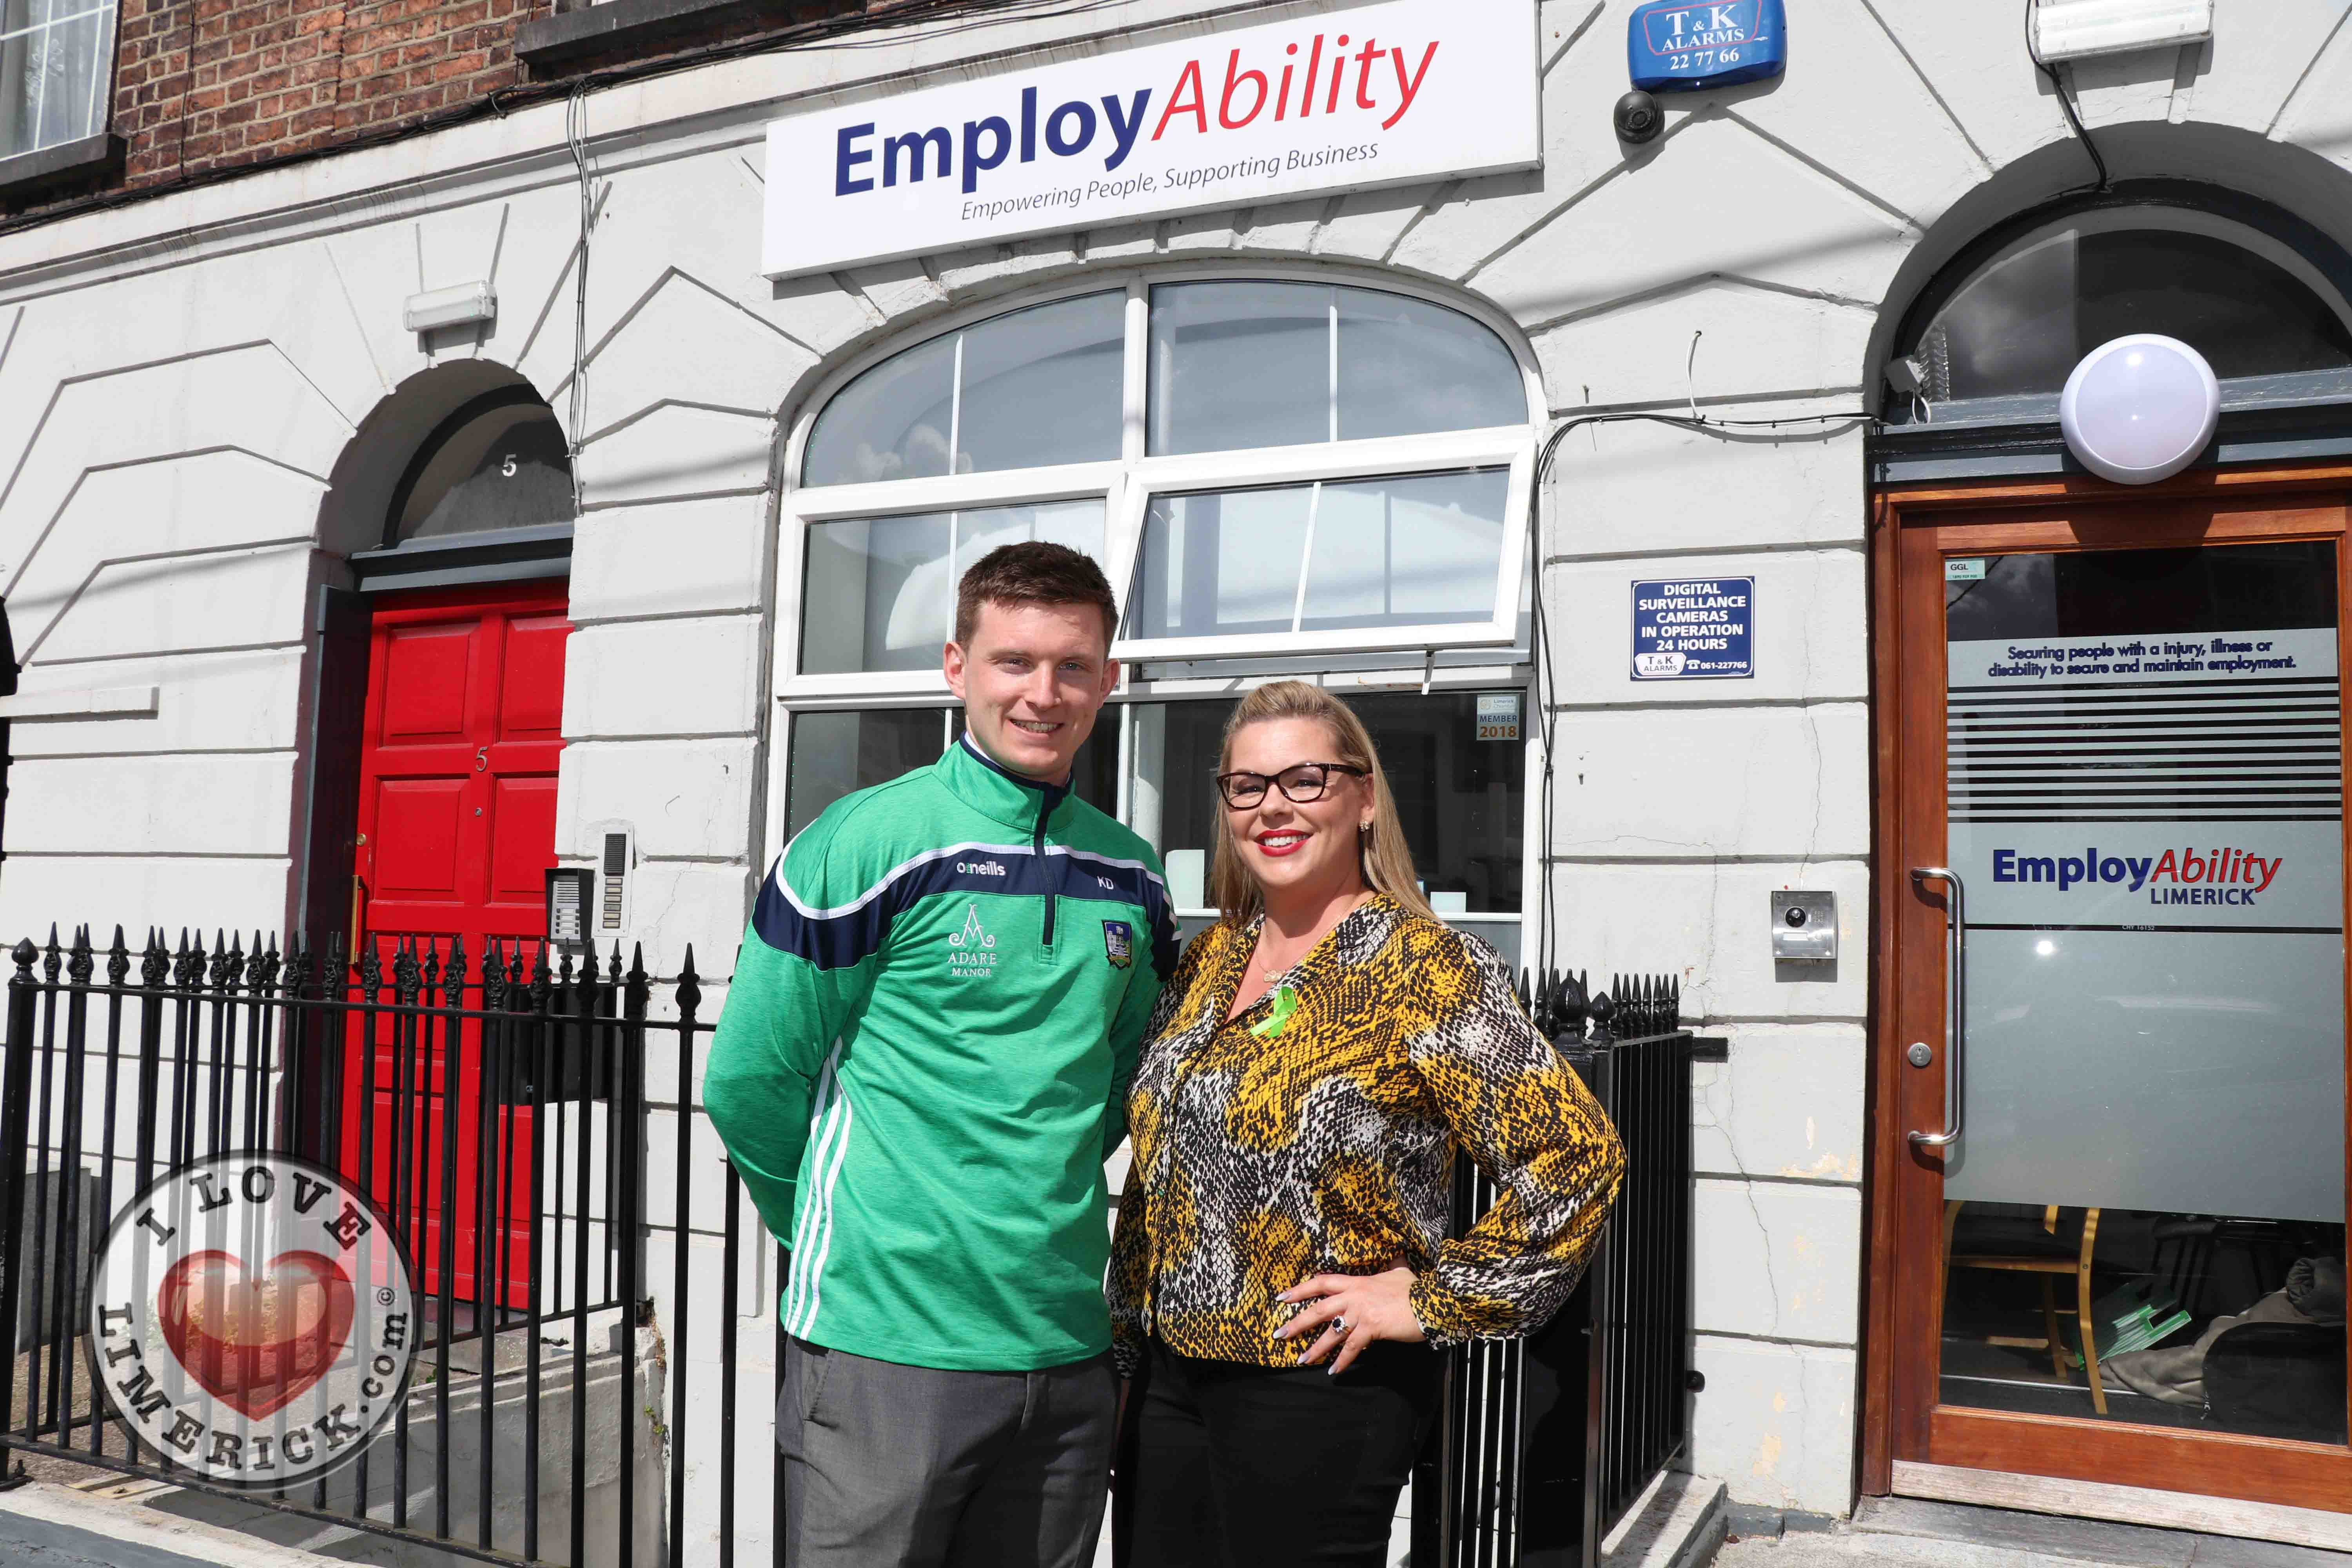 Pictured at the EmployAbility Limerick Office for the launch of the upcoming Green Ribbon campaign and 'Time to talk' day on Tuesday May 7th are Kevin Downes, Limerick Senior hurler, and Ursula Mackenzie, EmployAbility Limerick. Picture: Conor Owens/ilovelimerick.